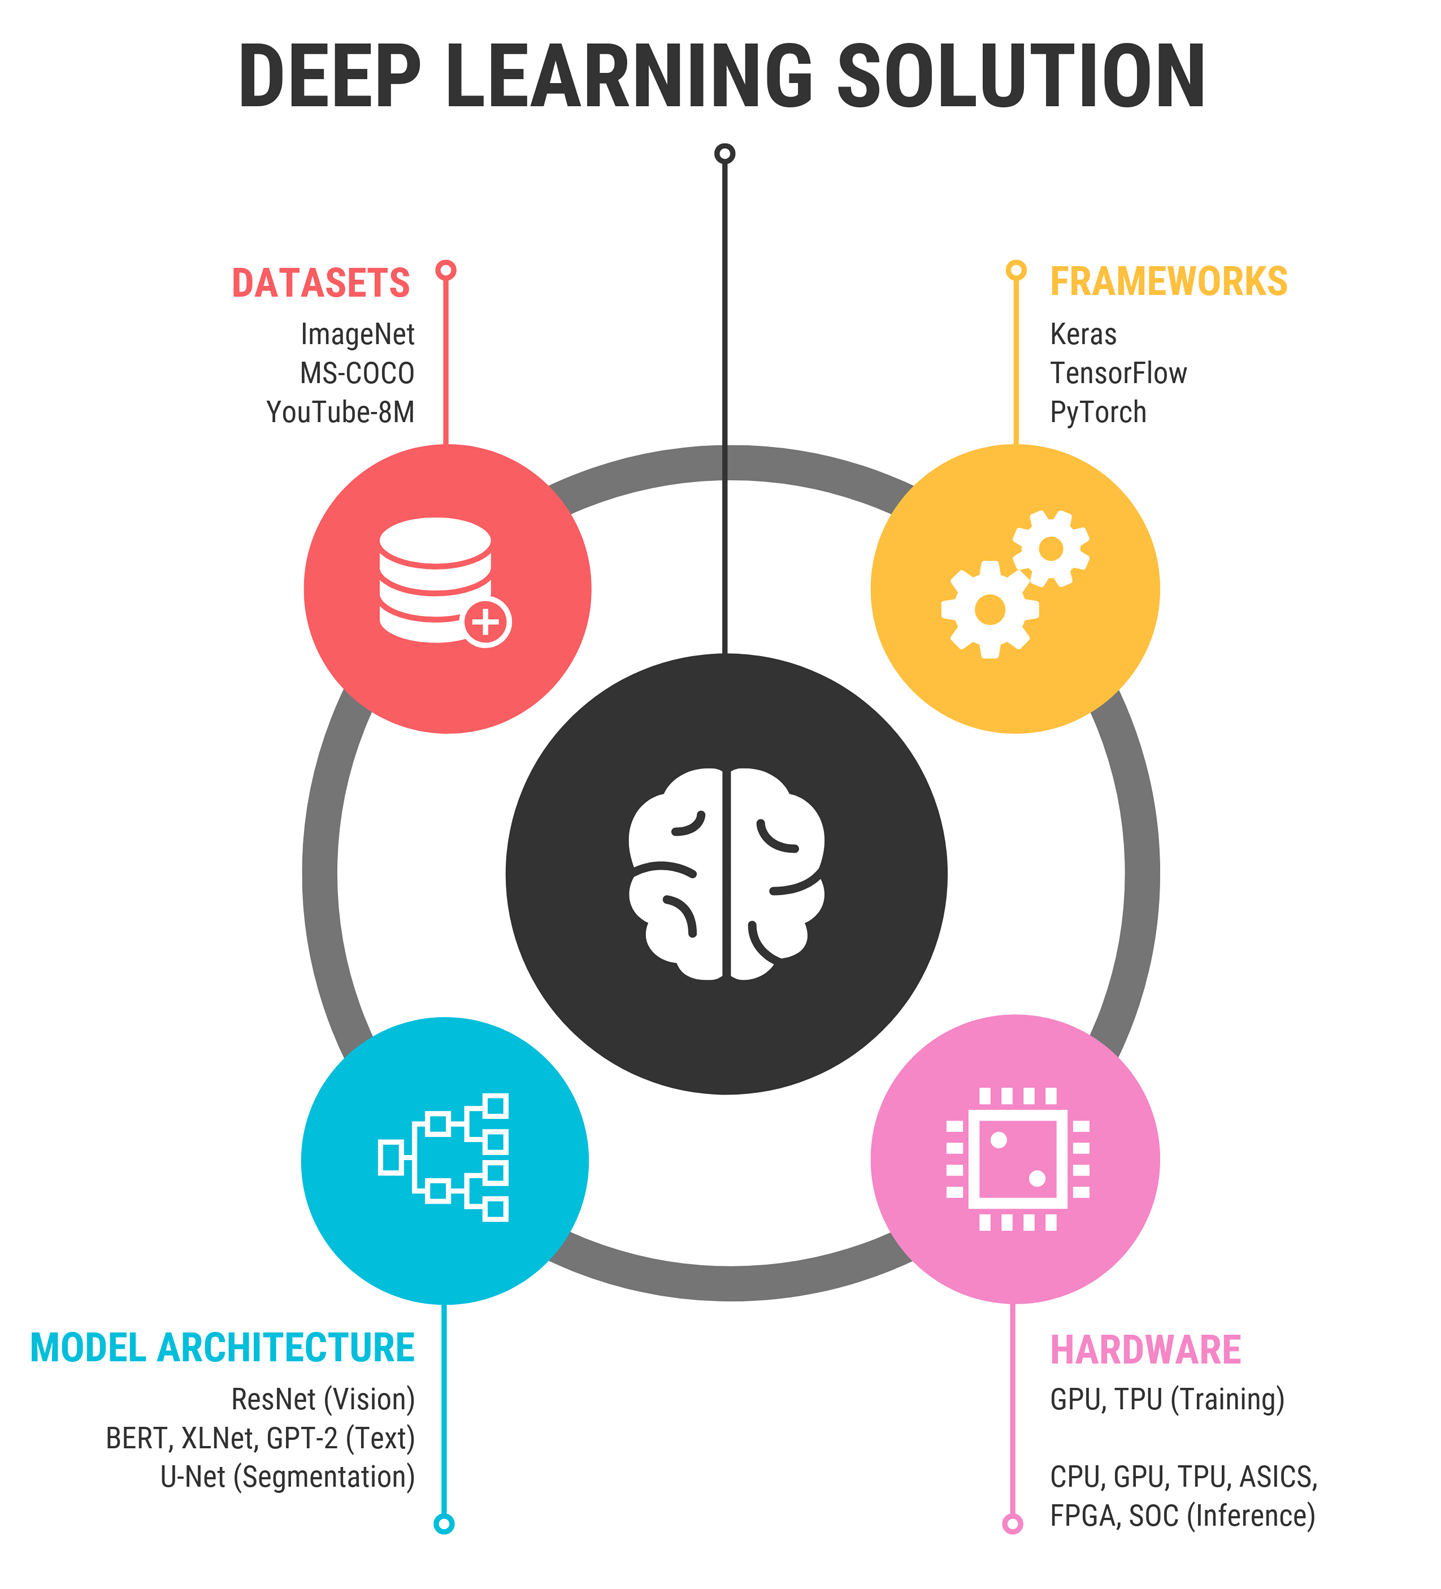 Ingredients for the perfect deep learning solution